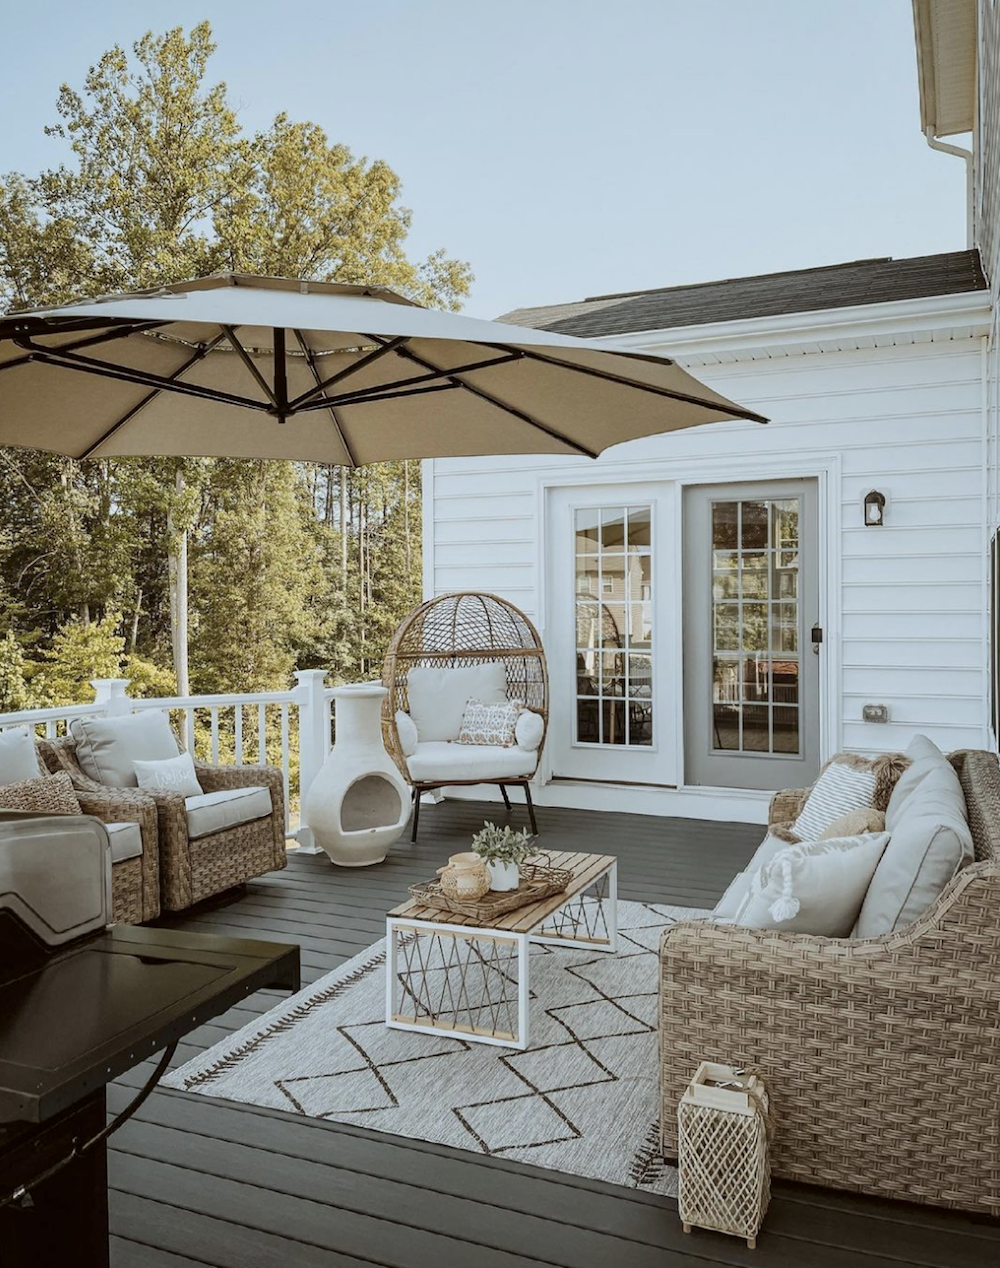 image of a patio with neutral rattan furniture and white accents